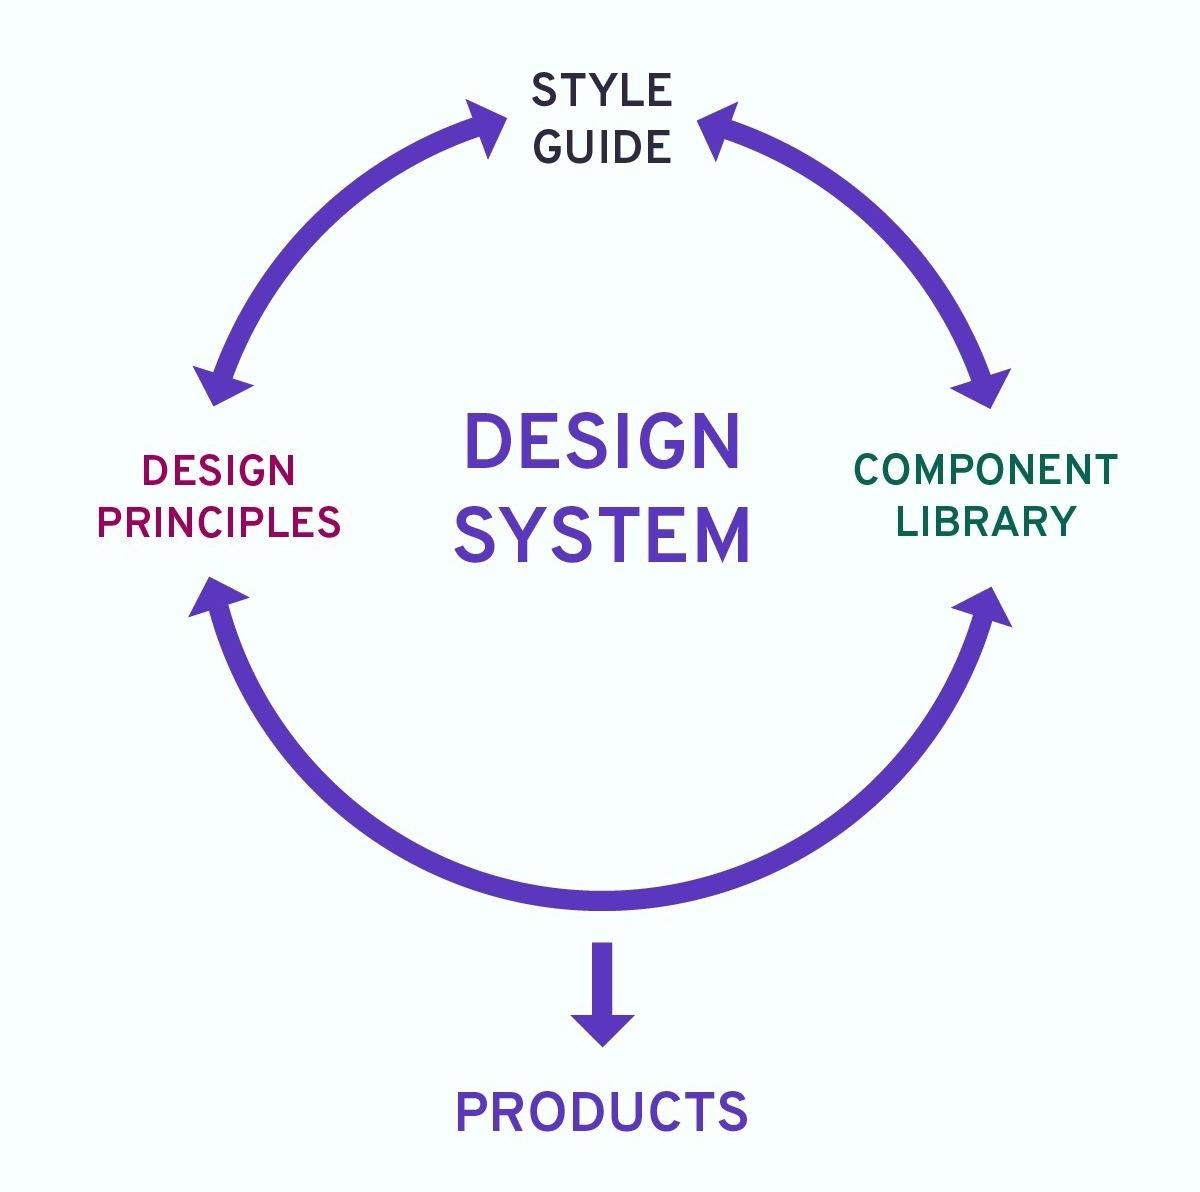 A graph illustrating how a design system operates